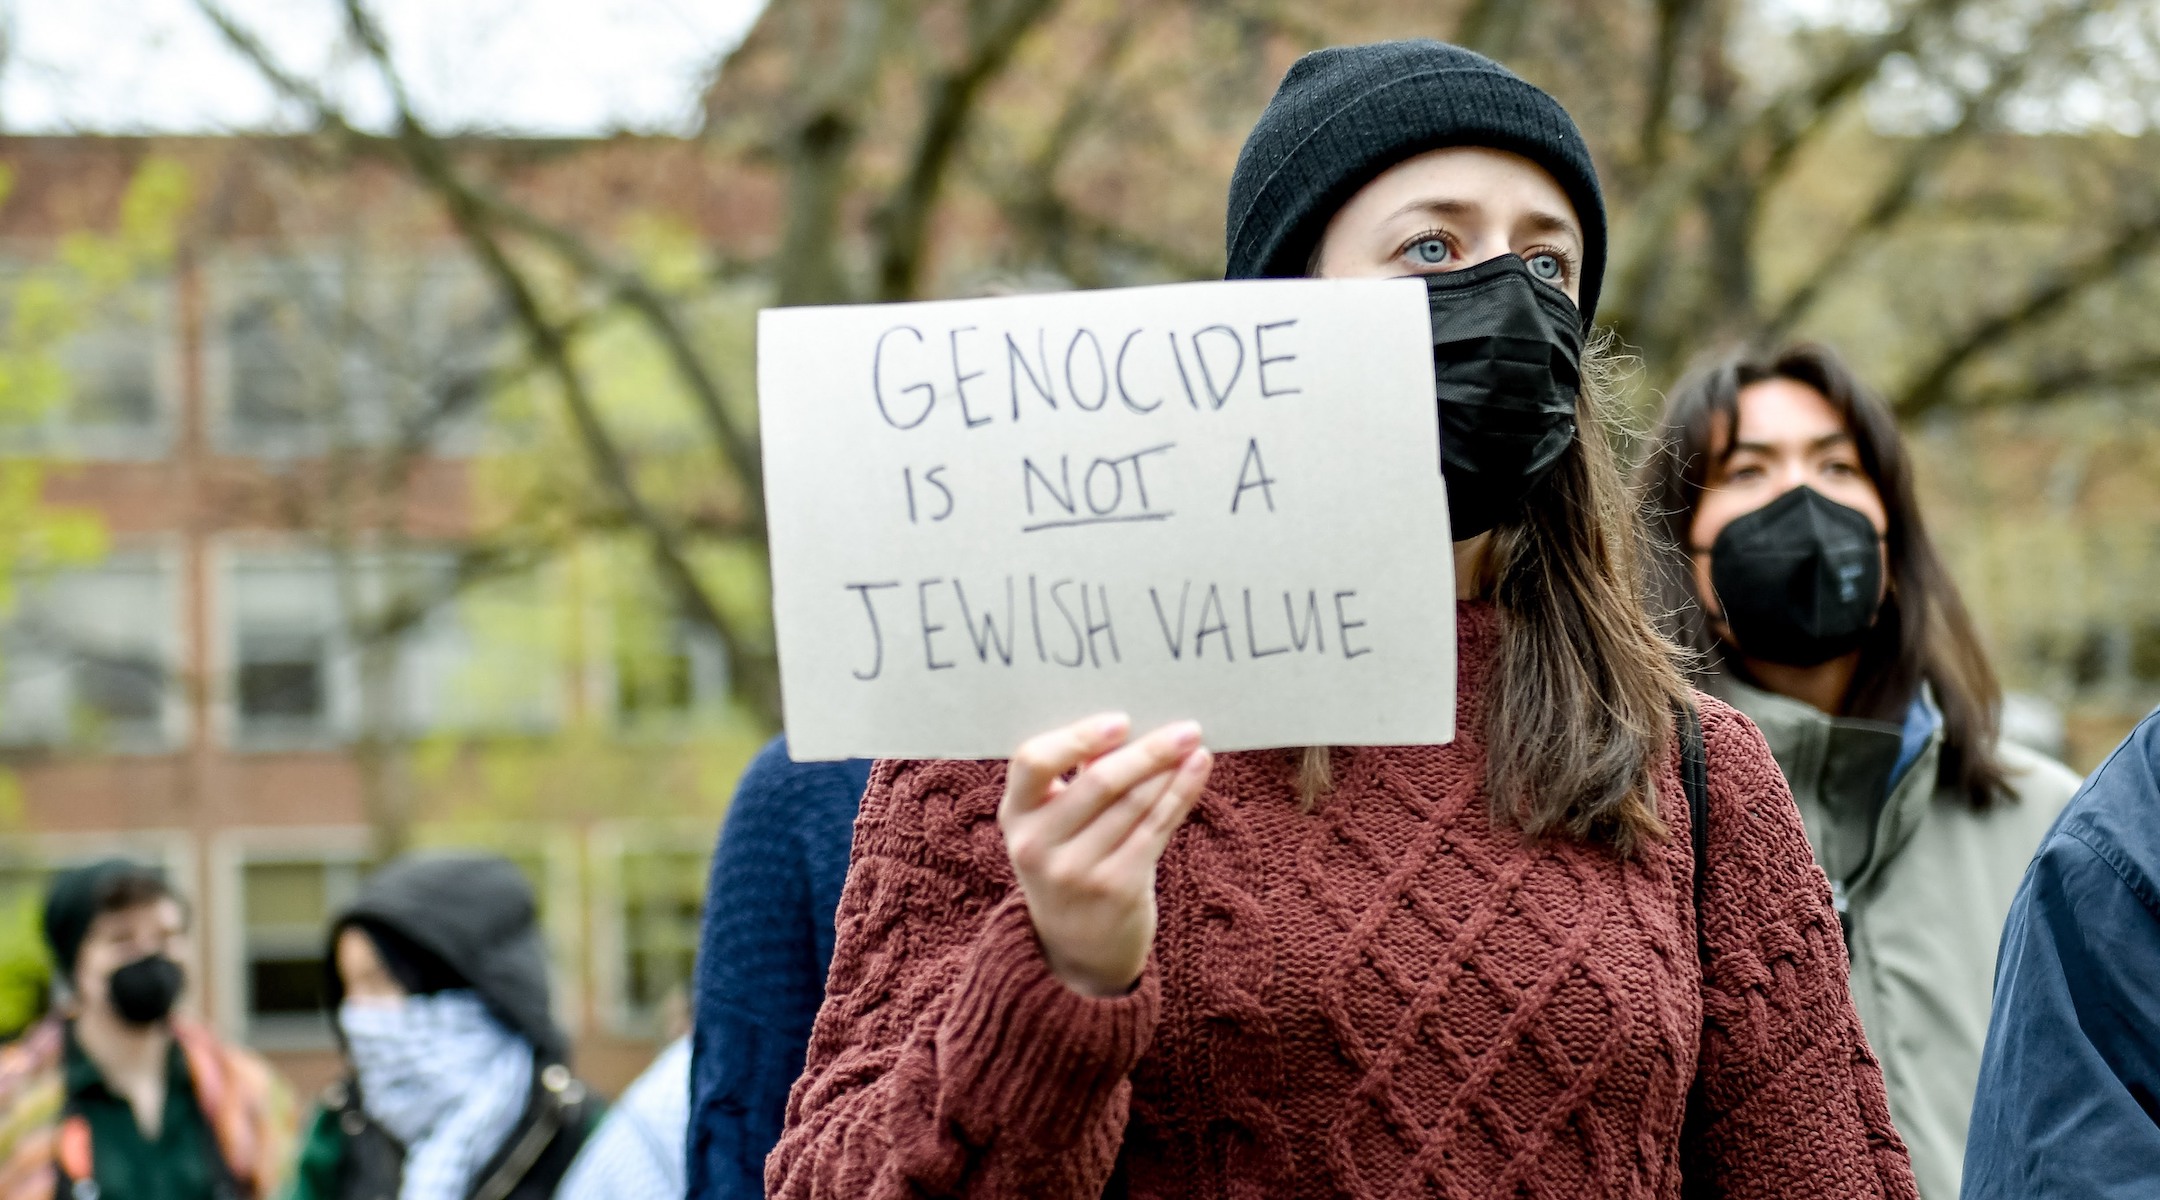 A young woman holds up a sign reading "Genocide is not a Jewish value"